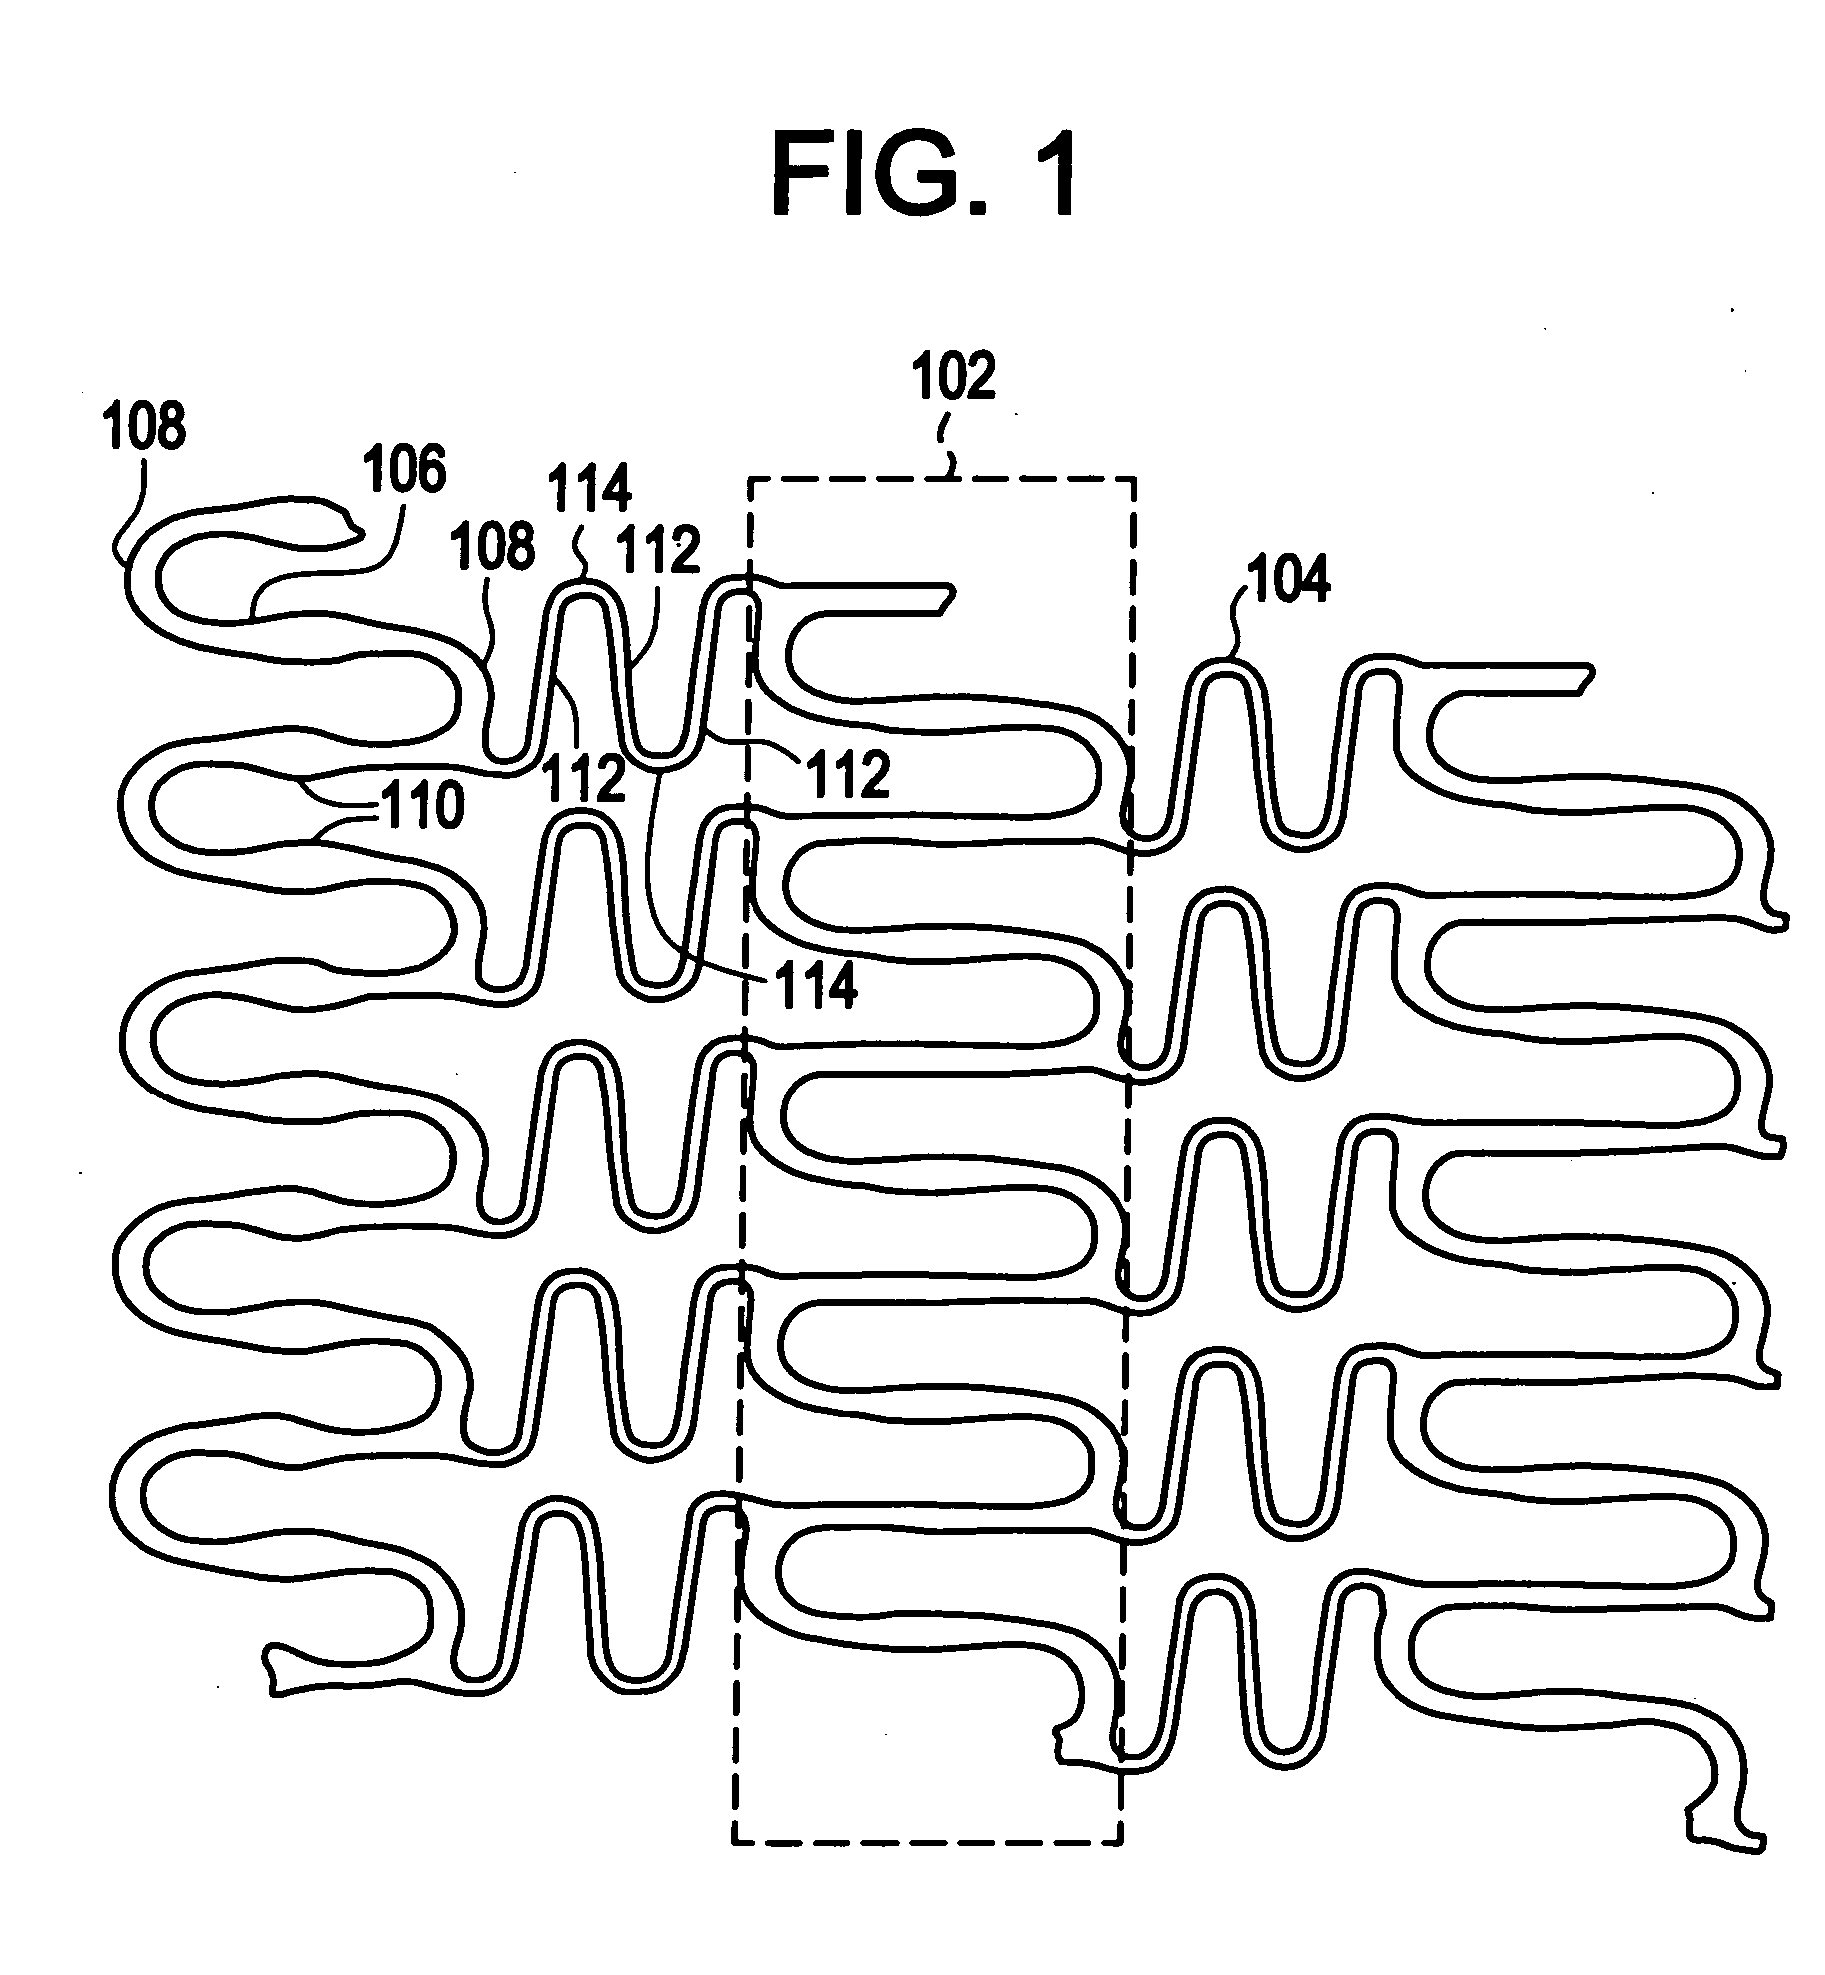 Polymeric stent having modified molecular structures in the flexible connectors and the radial struts of the hoops